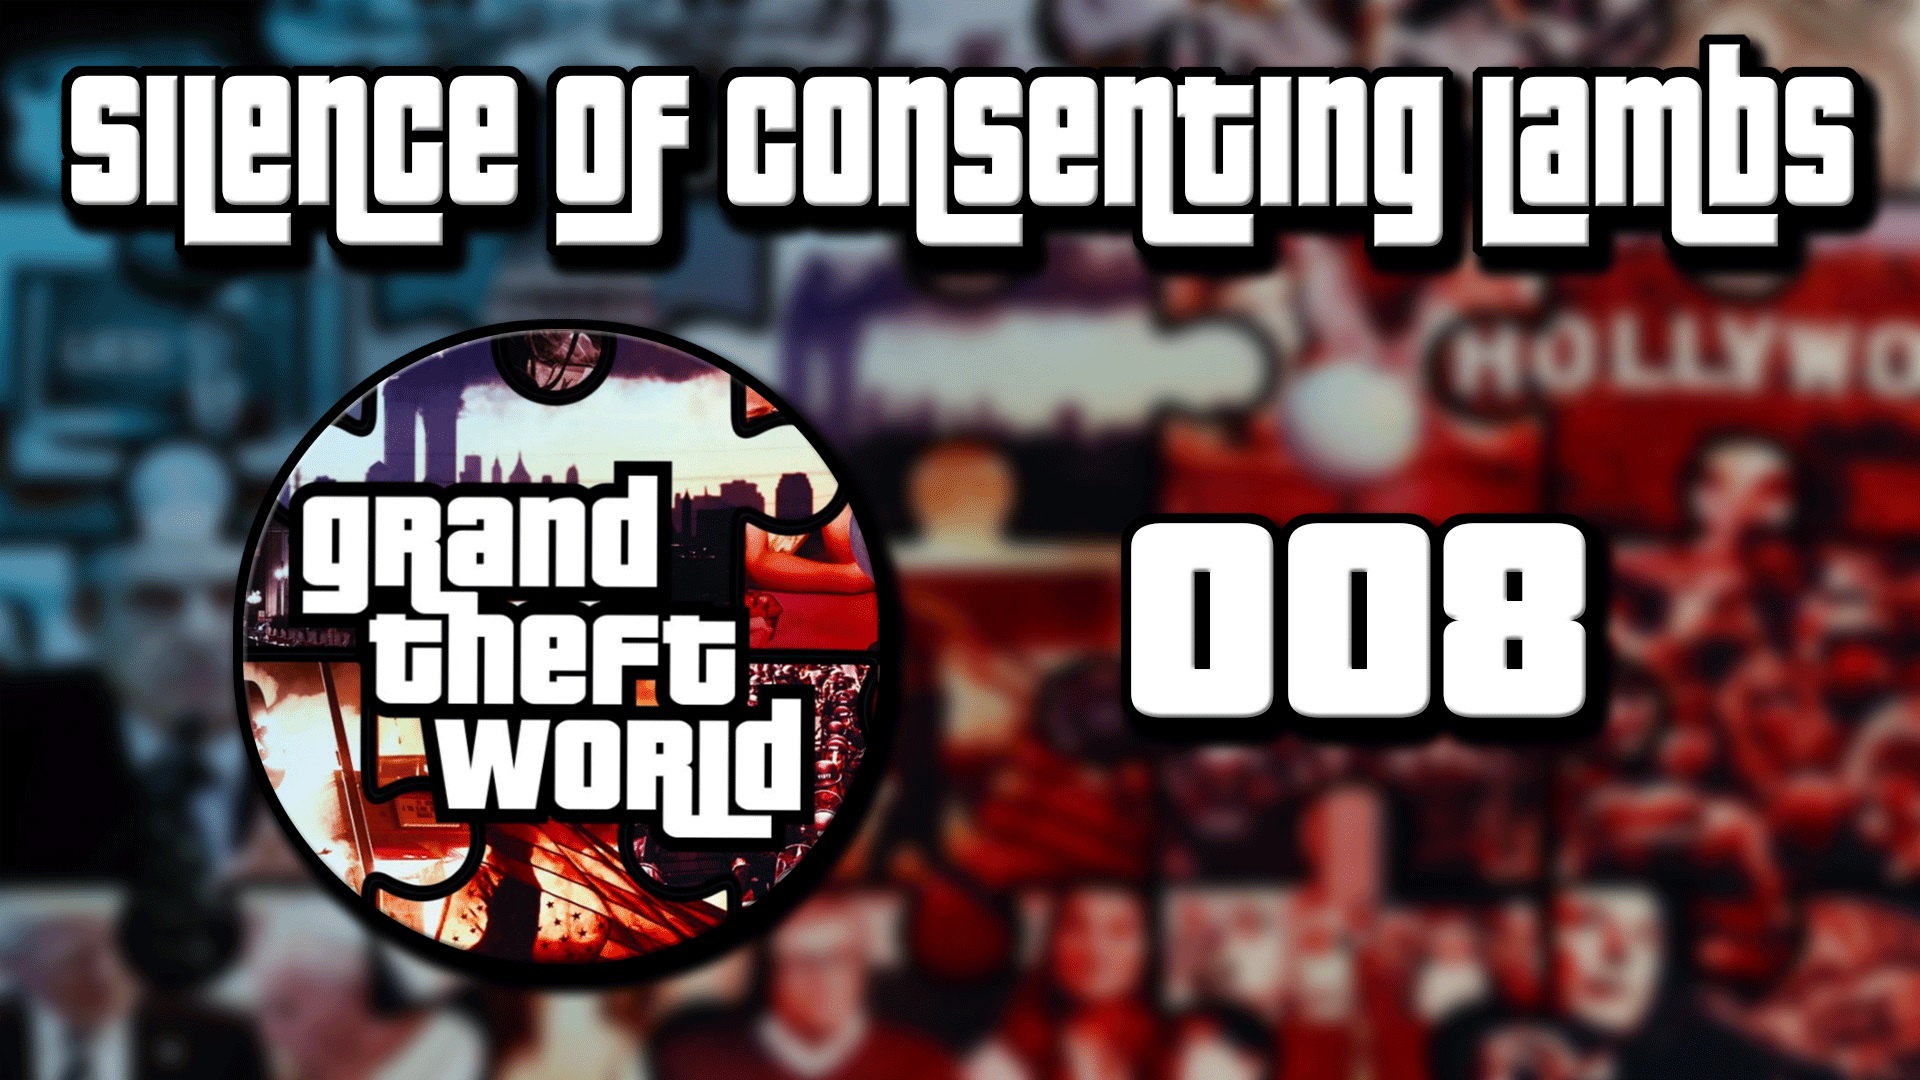 Grand Theft World Podcast 008 | Silence of Consenting Lambs